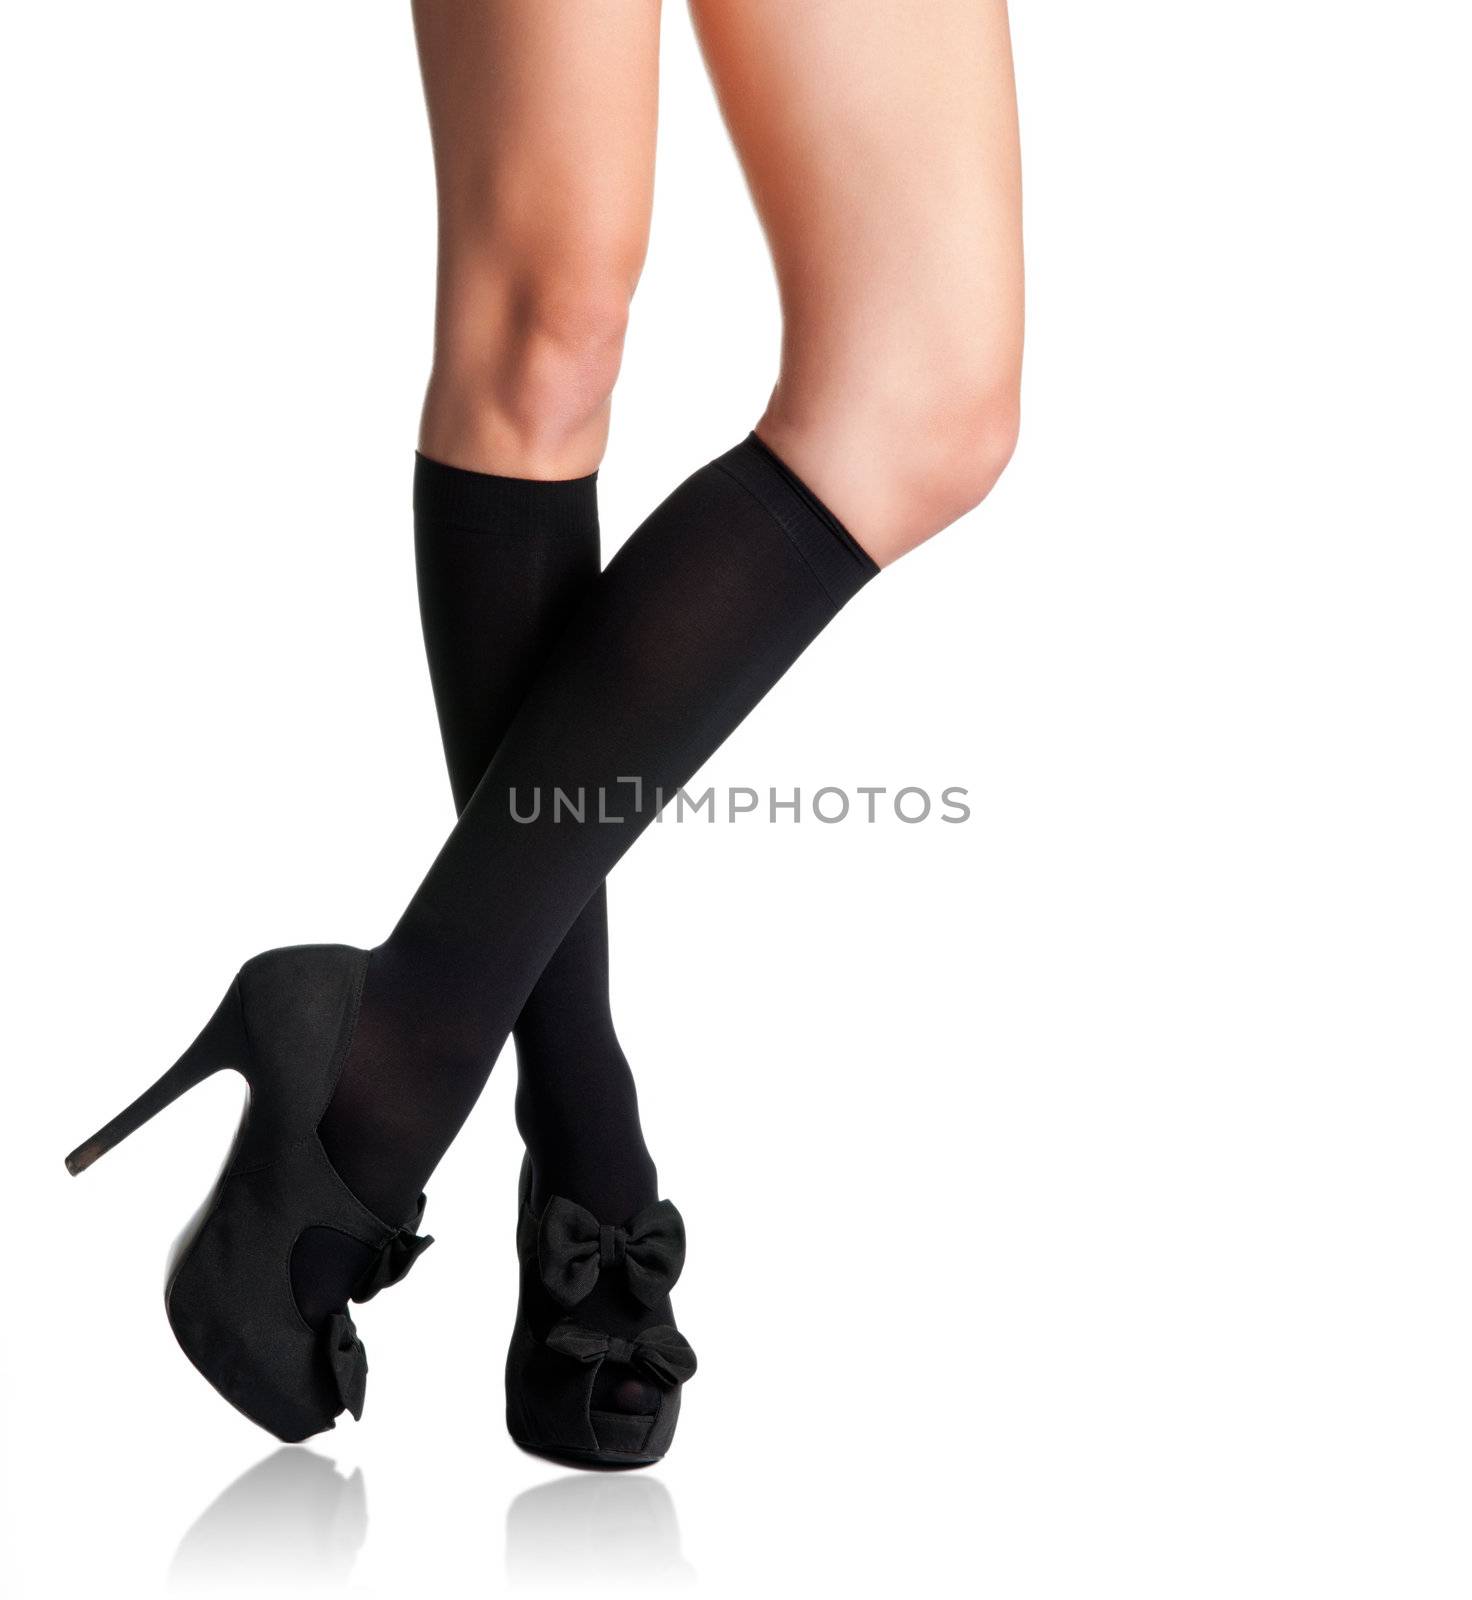 Businesswoman s legs in high stockings and high heels in a white background